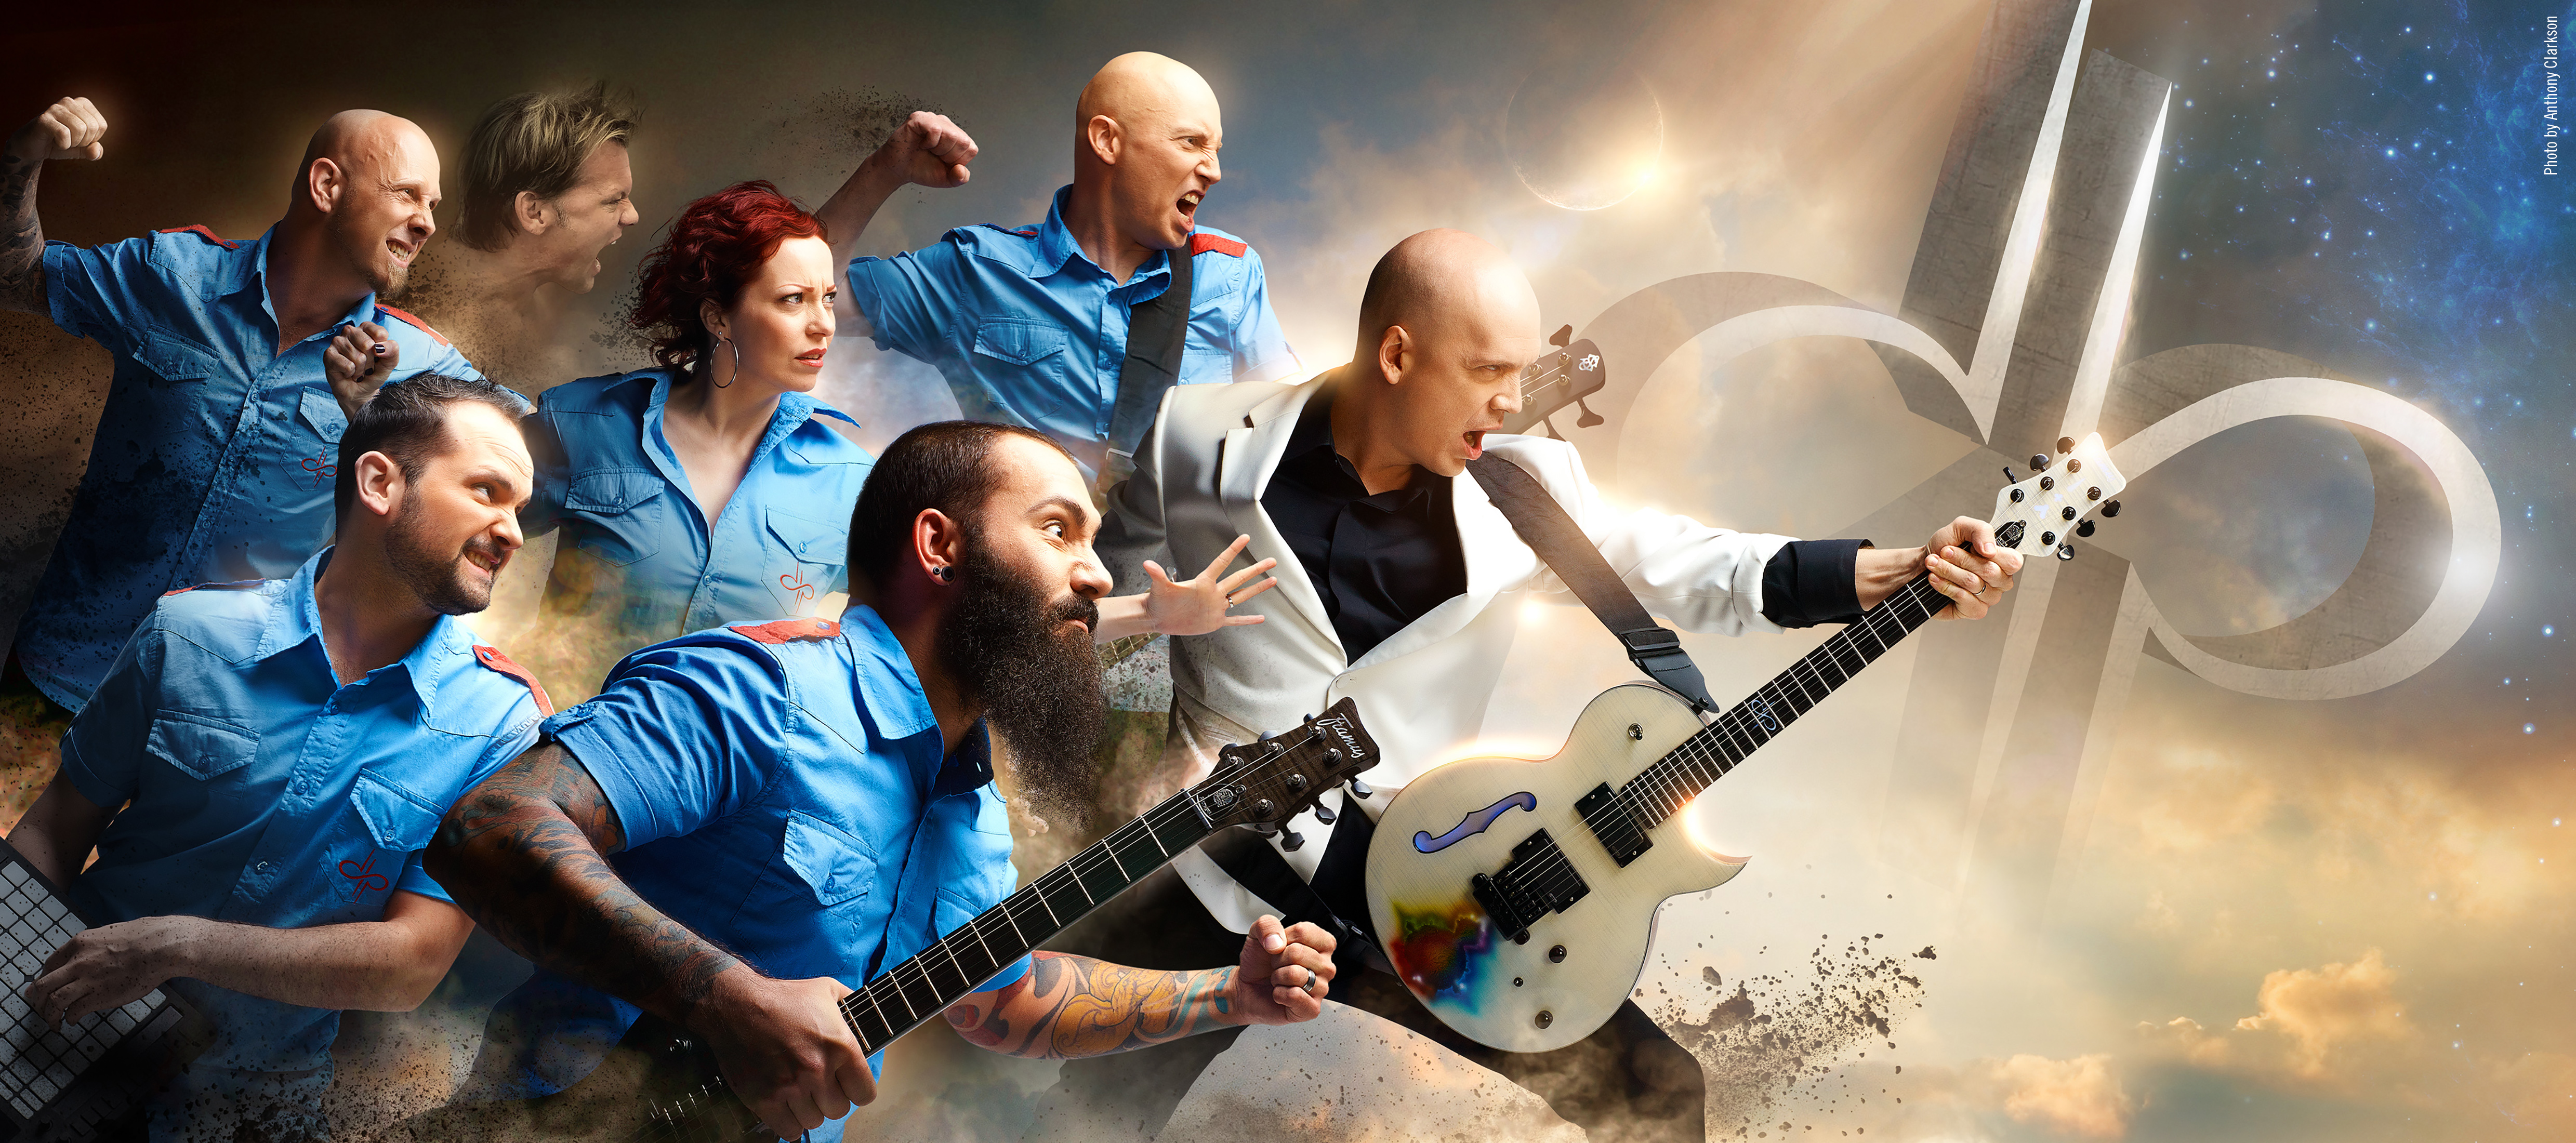 One of many iterations of the Devin Townsend Project. Image via http://jazzandrock.com | onetakekate.com